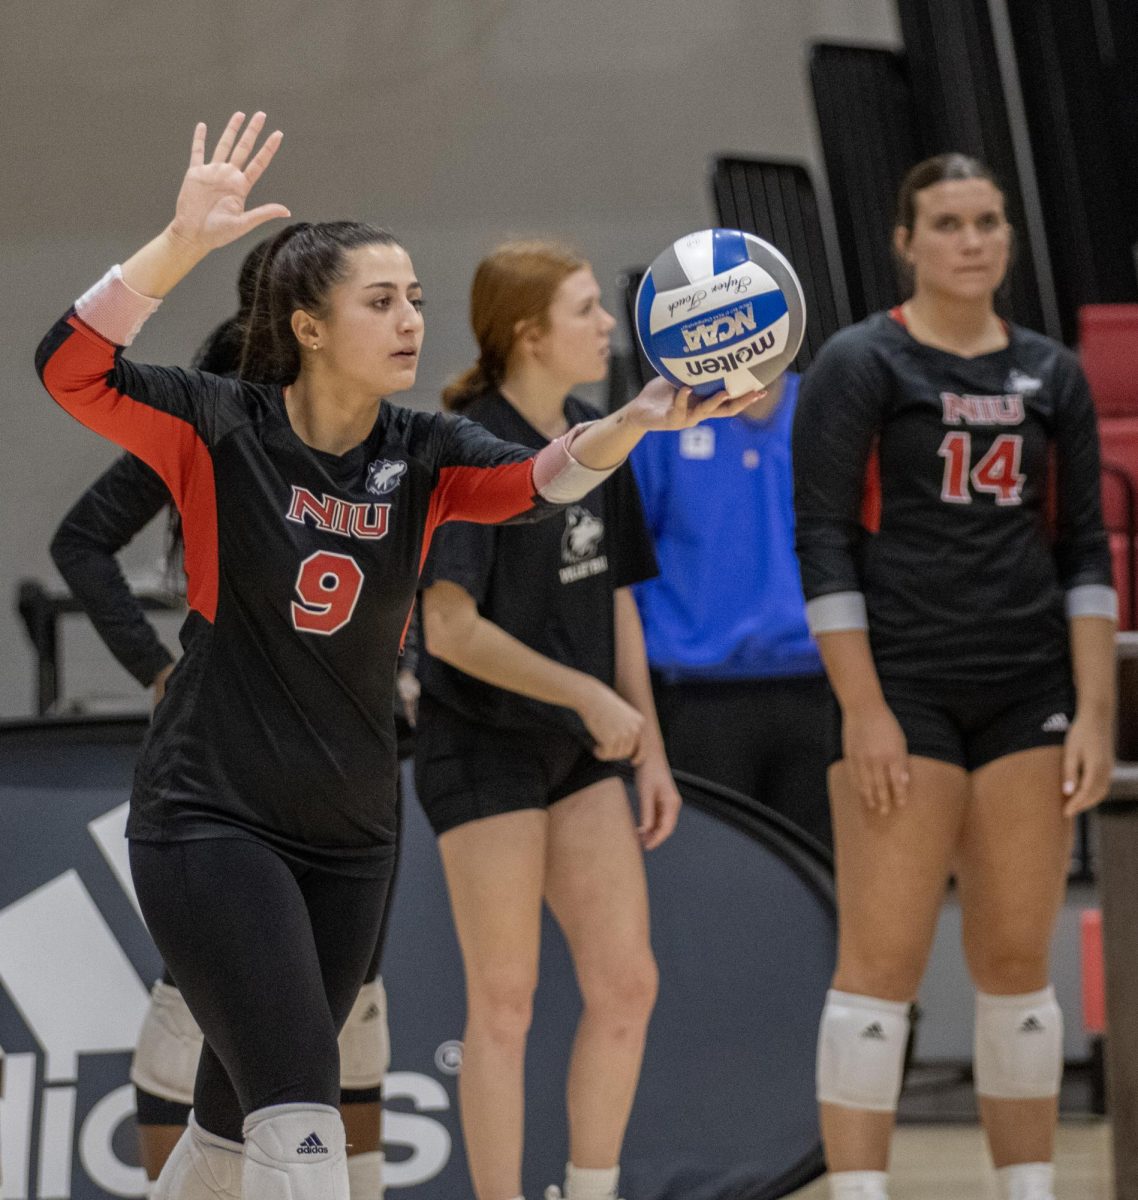 NIU+defensive+specialist%2Flibero+Jada+Cerniglia+serves+the+ball+during+Friday%E2%80%99s+MAC+battle+between+the+Huskies+and+the+University+of+Akron+Zips.+NIU+was+undone+in+three+sets+to+extend+its+losing+streak+to+four+matches.+%28Tim+Dodge+%7C+Northern+Star%29